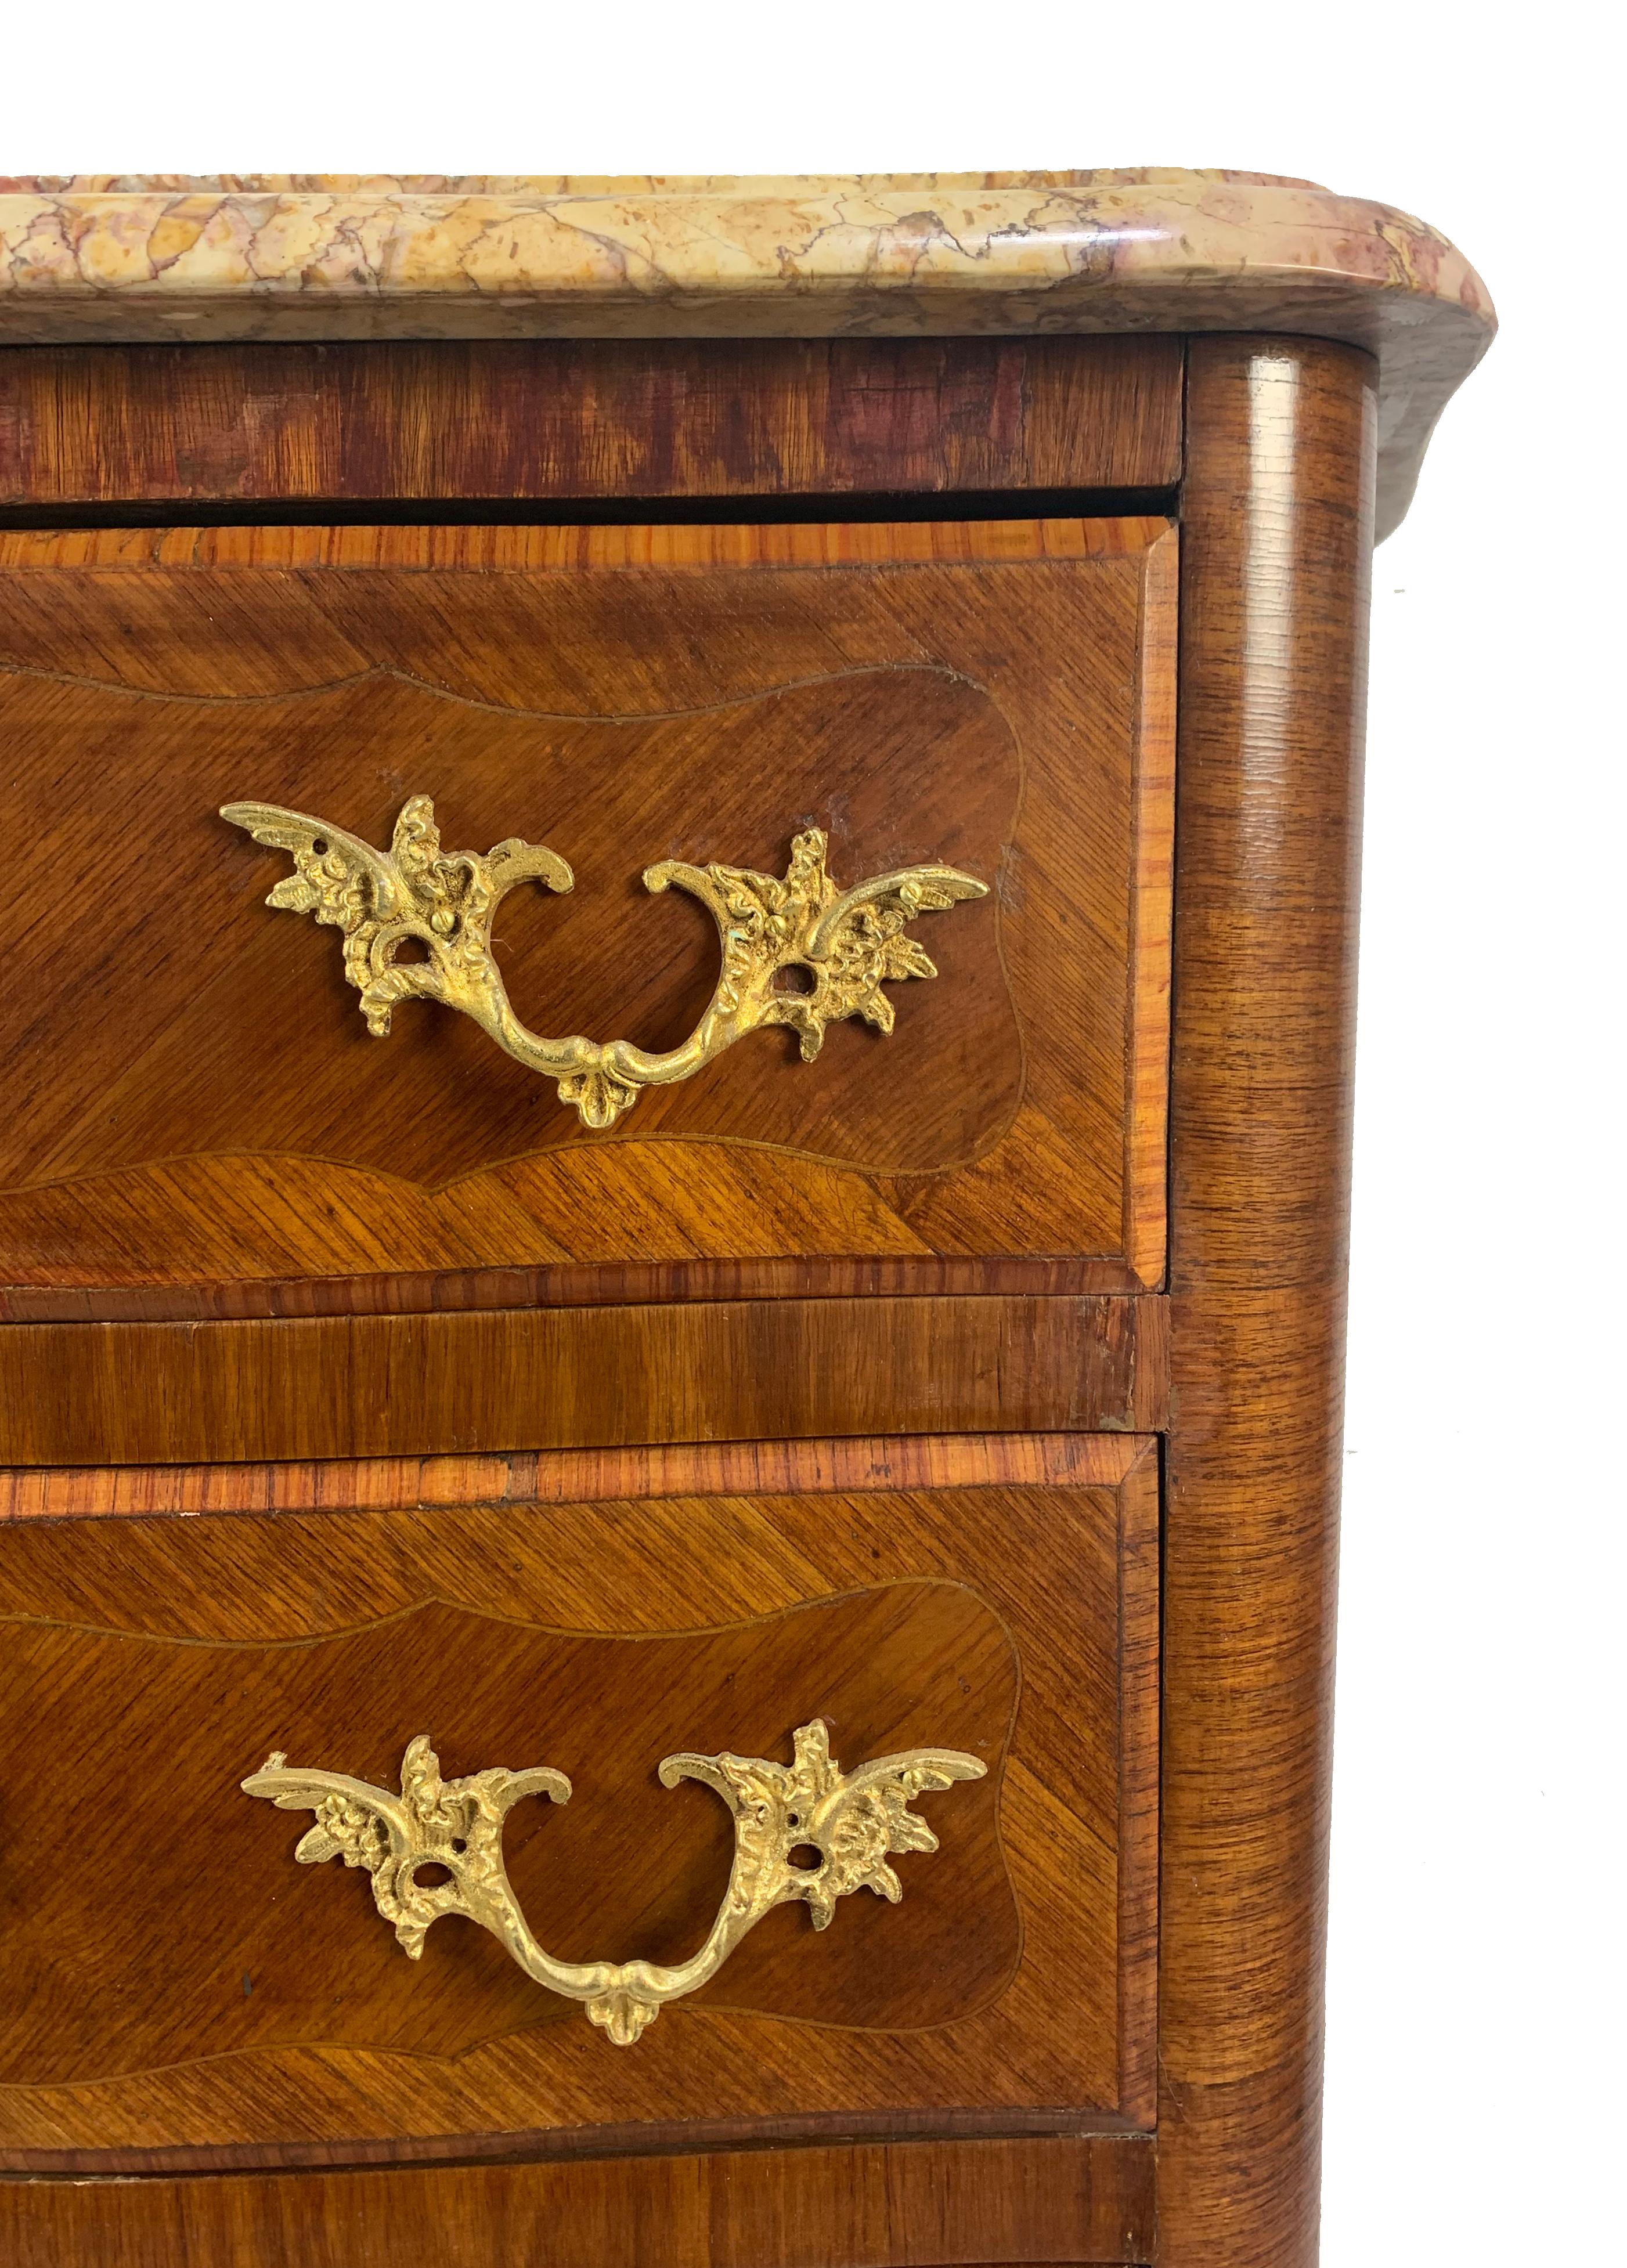 Elegant antique French 19th century Louis XVI style tulipwood chiffonier or lingerie chest with six drawers. Features original marble top and beautiful ornate bronze ormolu mounts and drawer pulls.